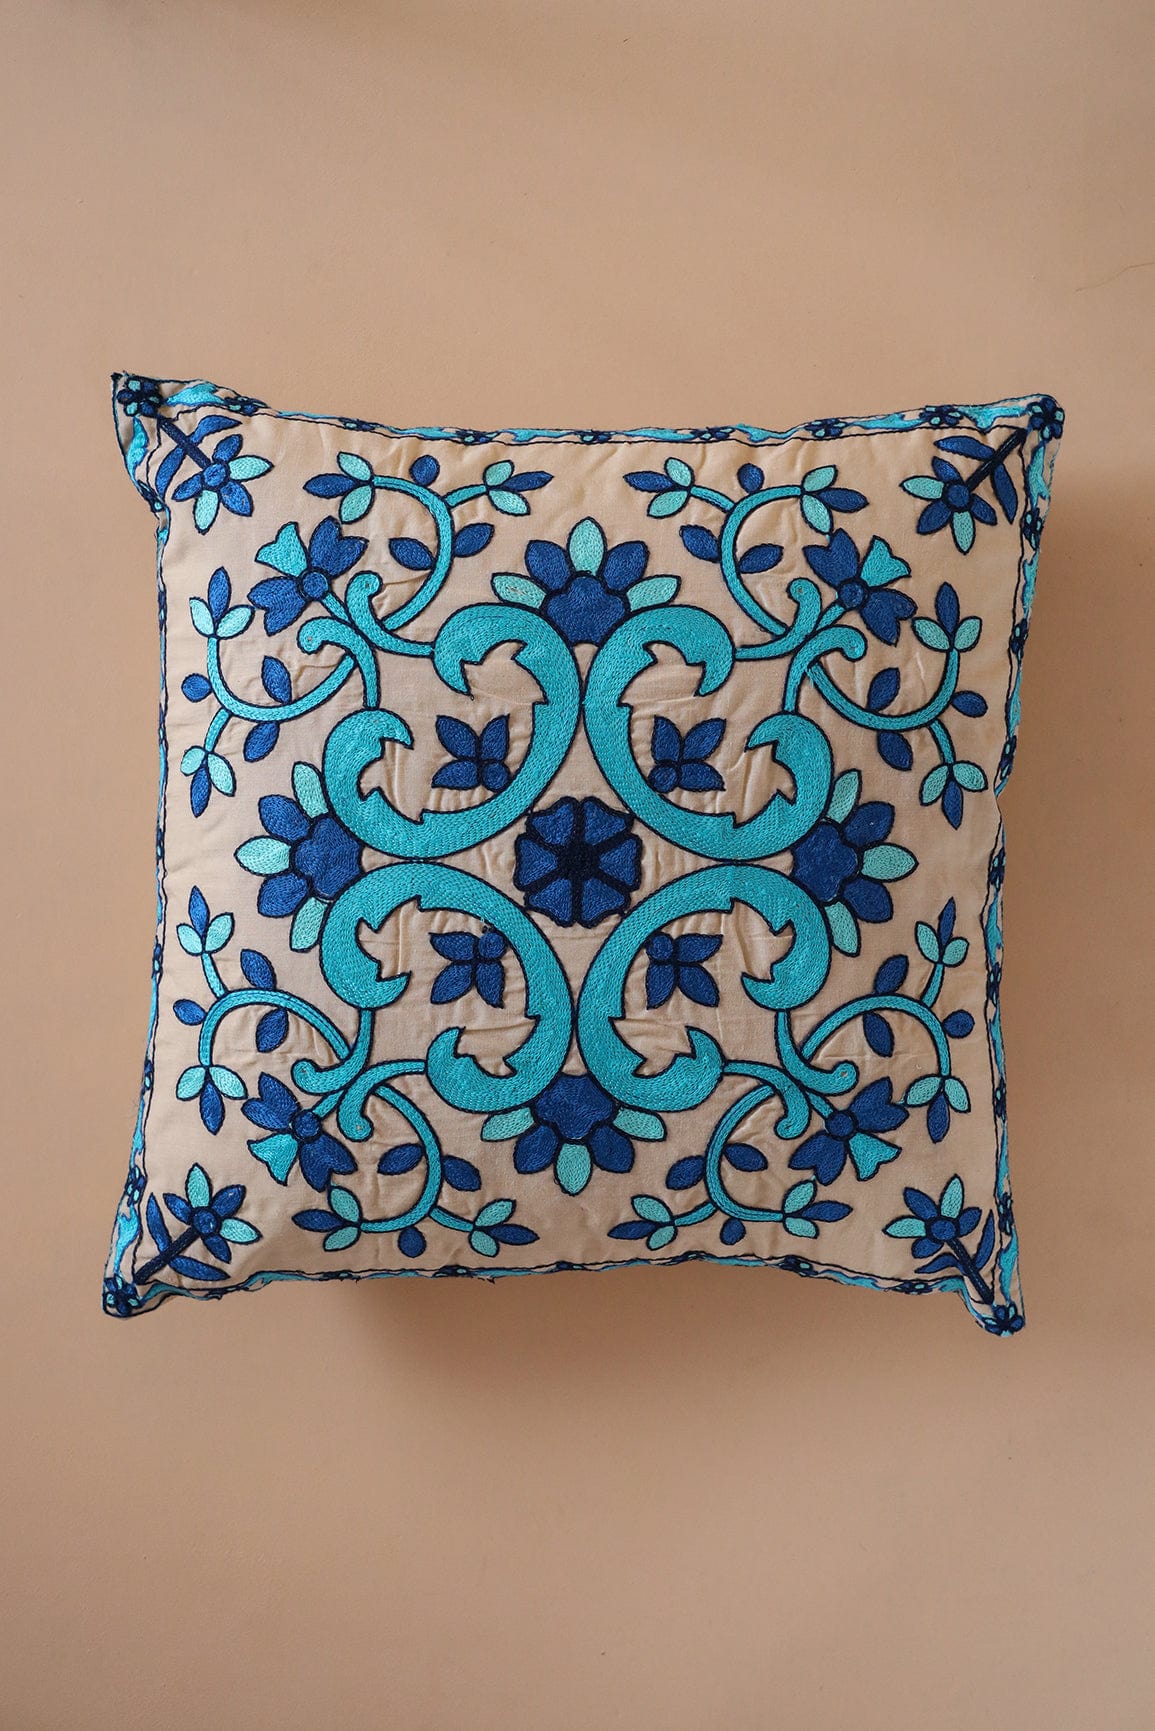 doeraa Royal Blue and Sky Blue Embroidery on off white cotton Cushion Cover (16*16 inches)